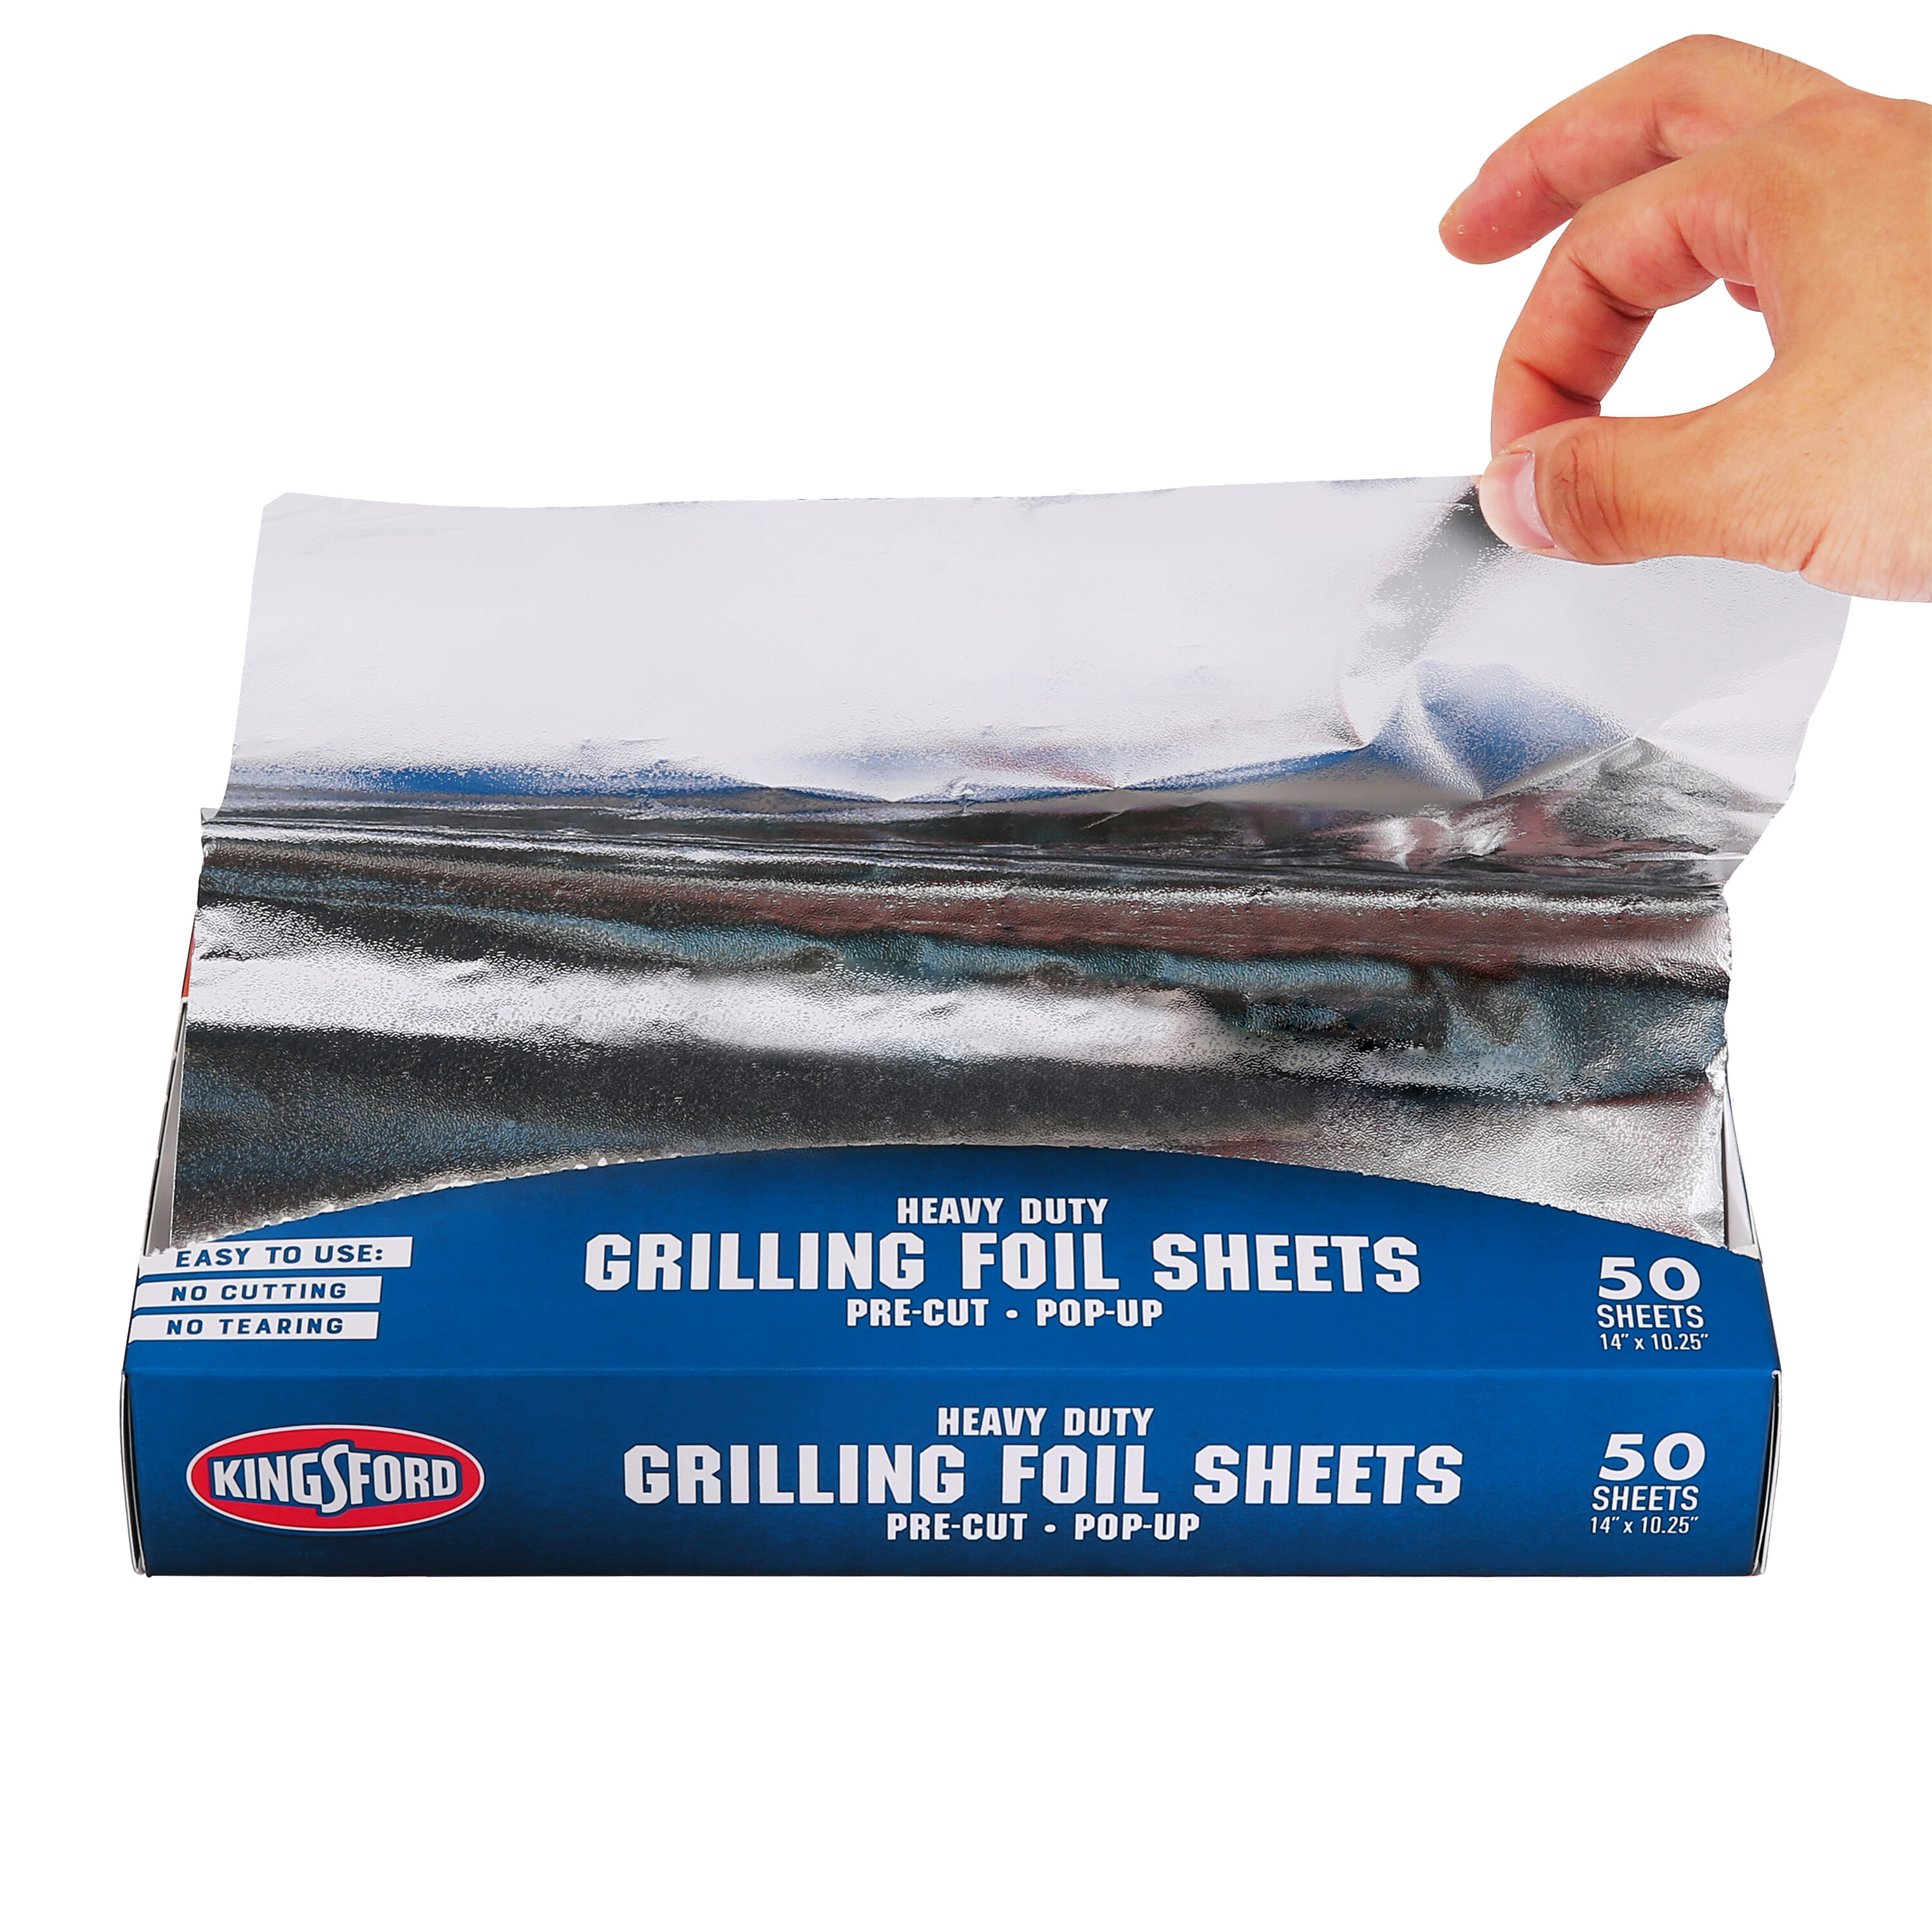 Aluminum Foil - Foil Wrapping Paper - Non-Stick Tin Foil - Large Aluminum Foil Sheets - Tin Foil for Leftovers, Grilling, Baking, and Cooking, 16/32/